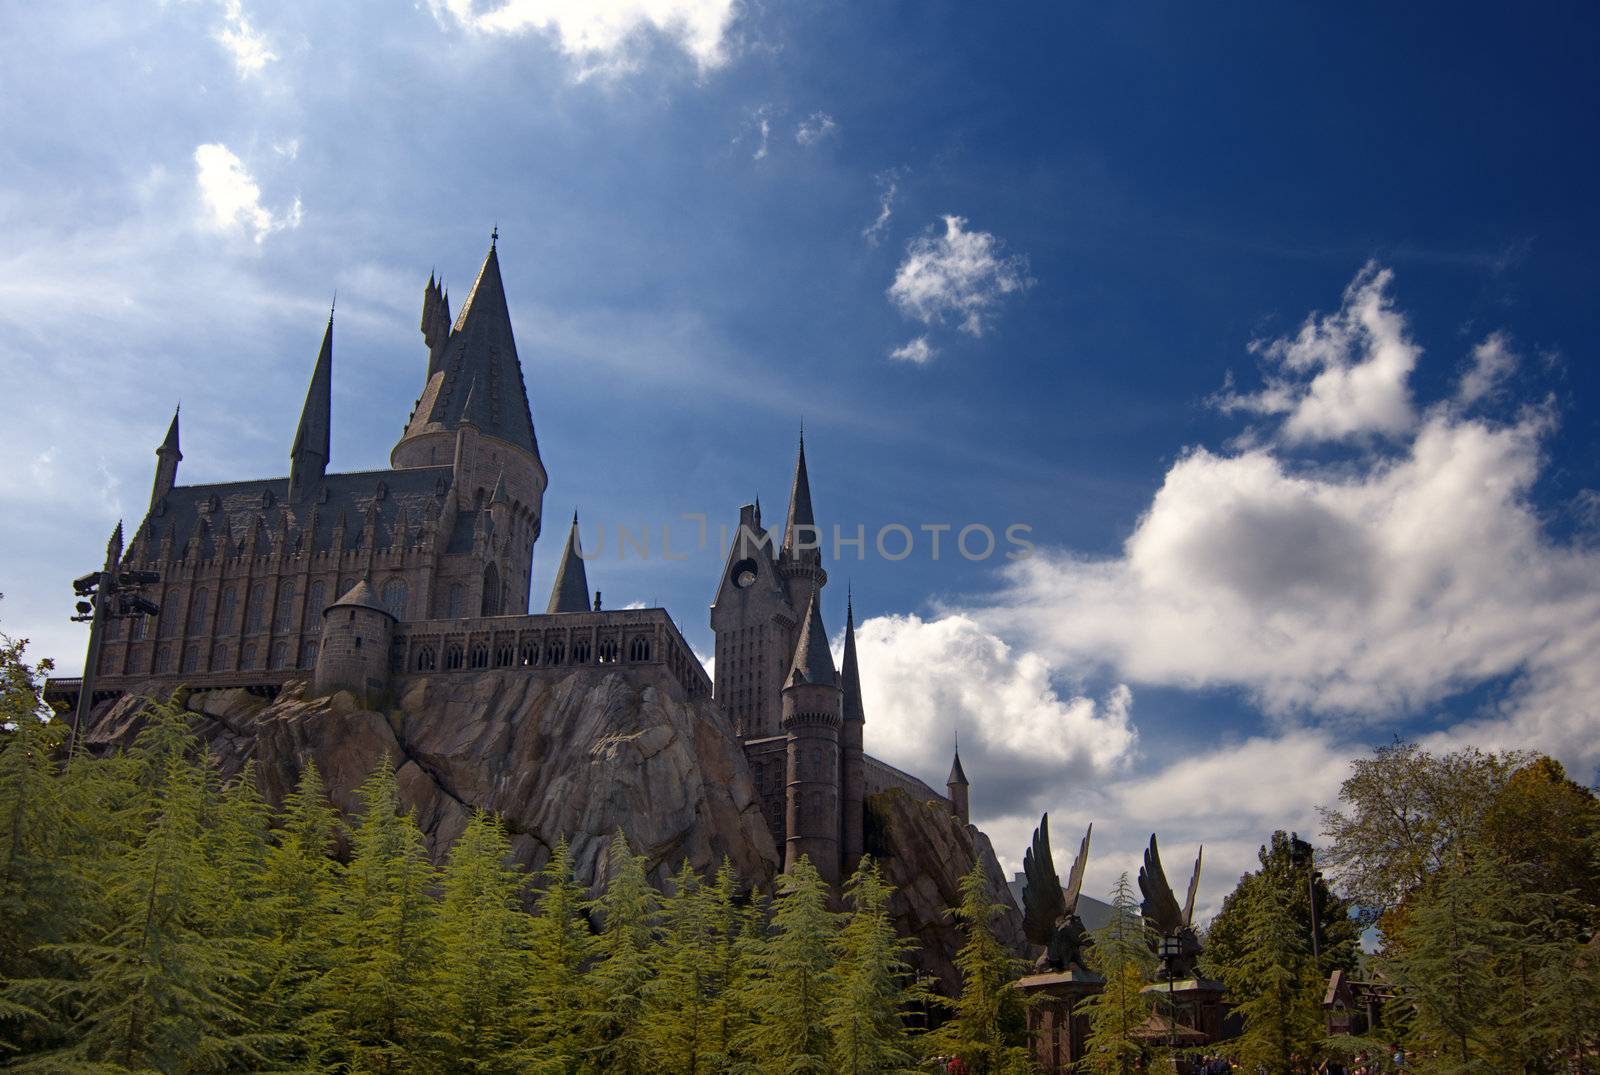 Hogwarts Castle at the Wizarding World of Harry Potter, Orlando, Florida, 15th October 2010.  It took 5 years and $265 million to build.